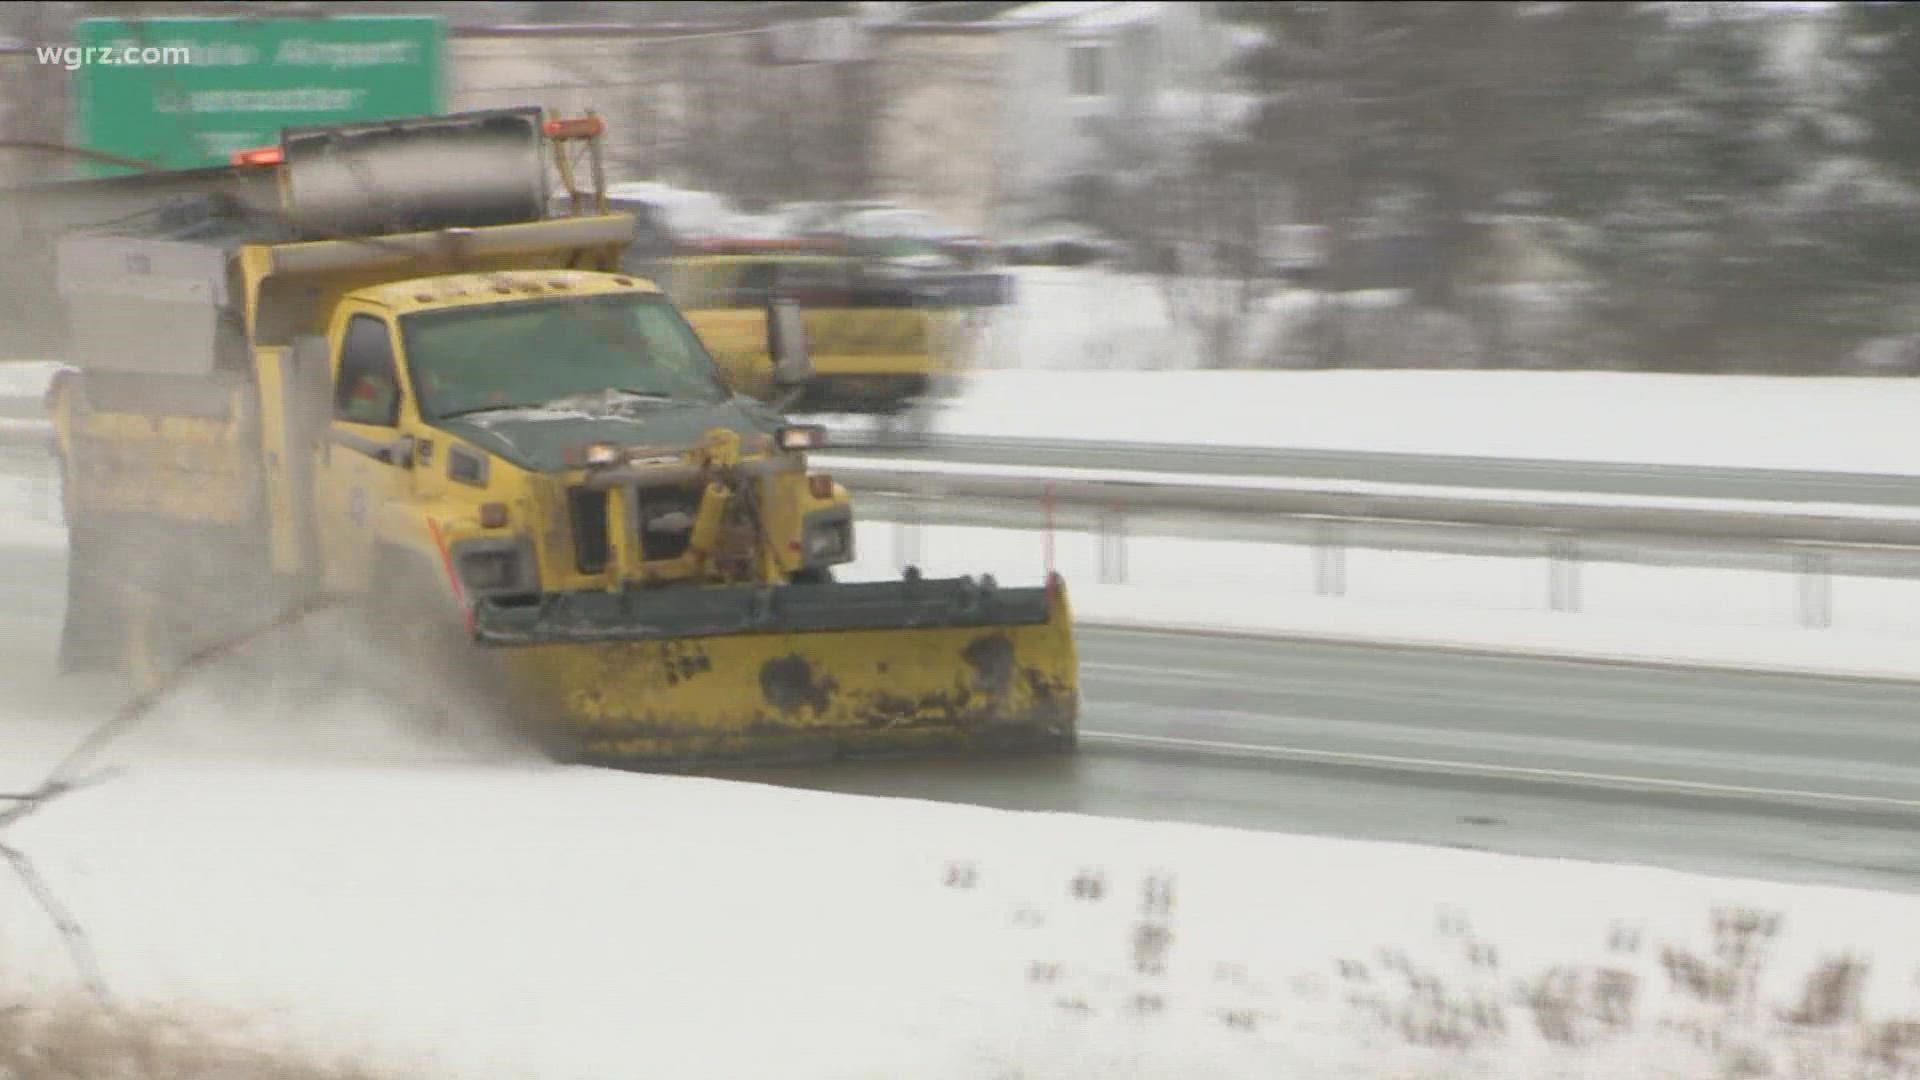 The state thruway authority also say it has a some plow operators out sick, but will bring others in from other parts of the state.